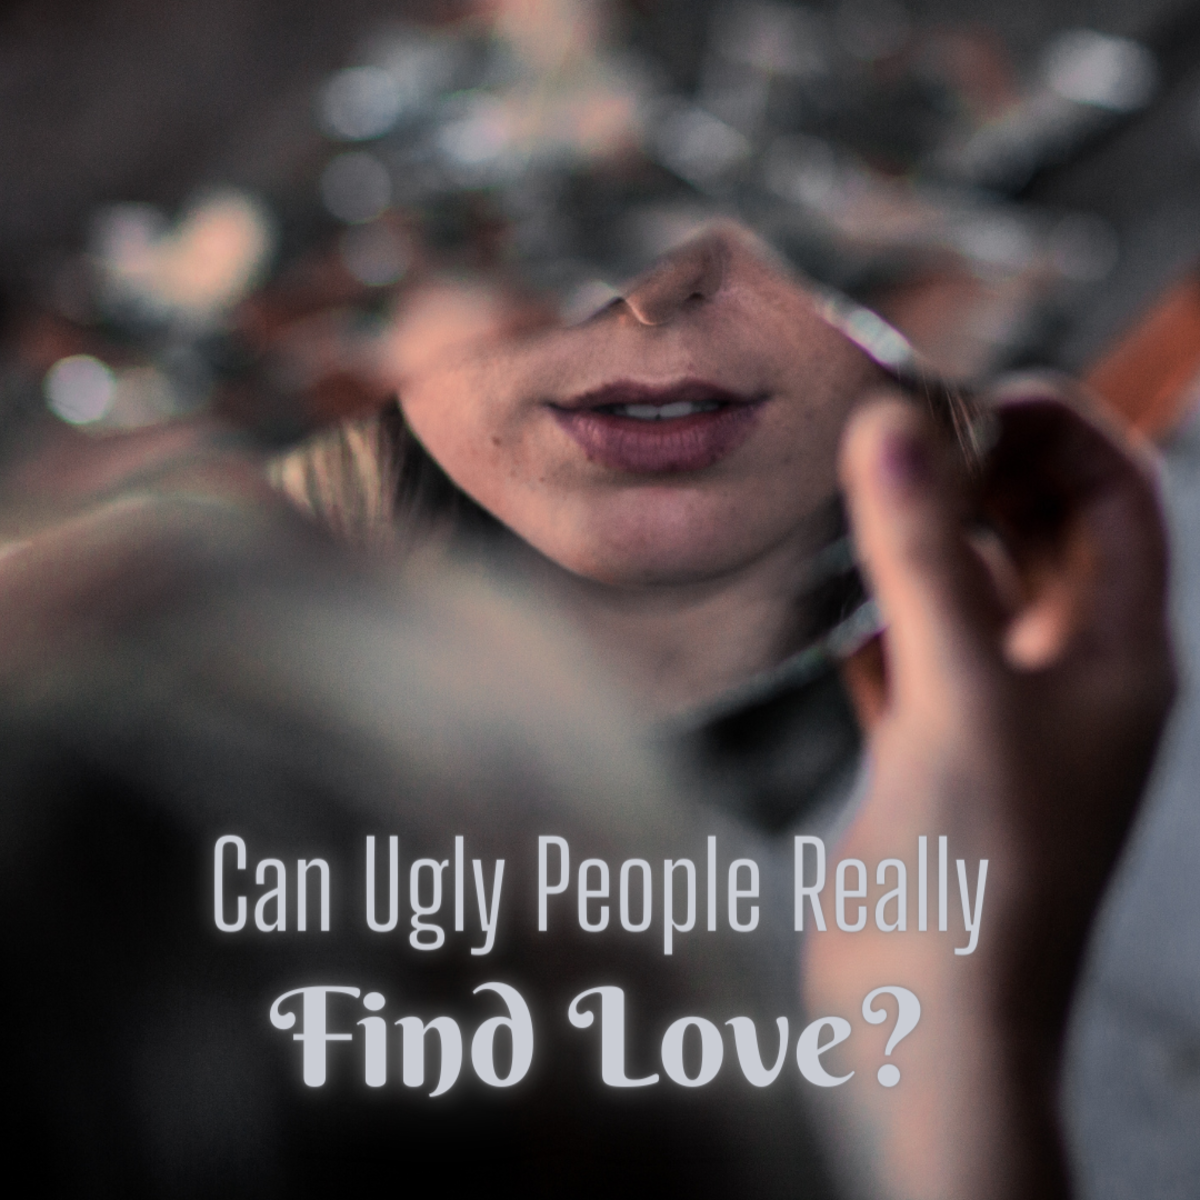 Can ugly people really find true love?